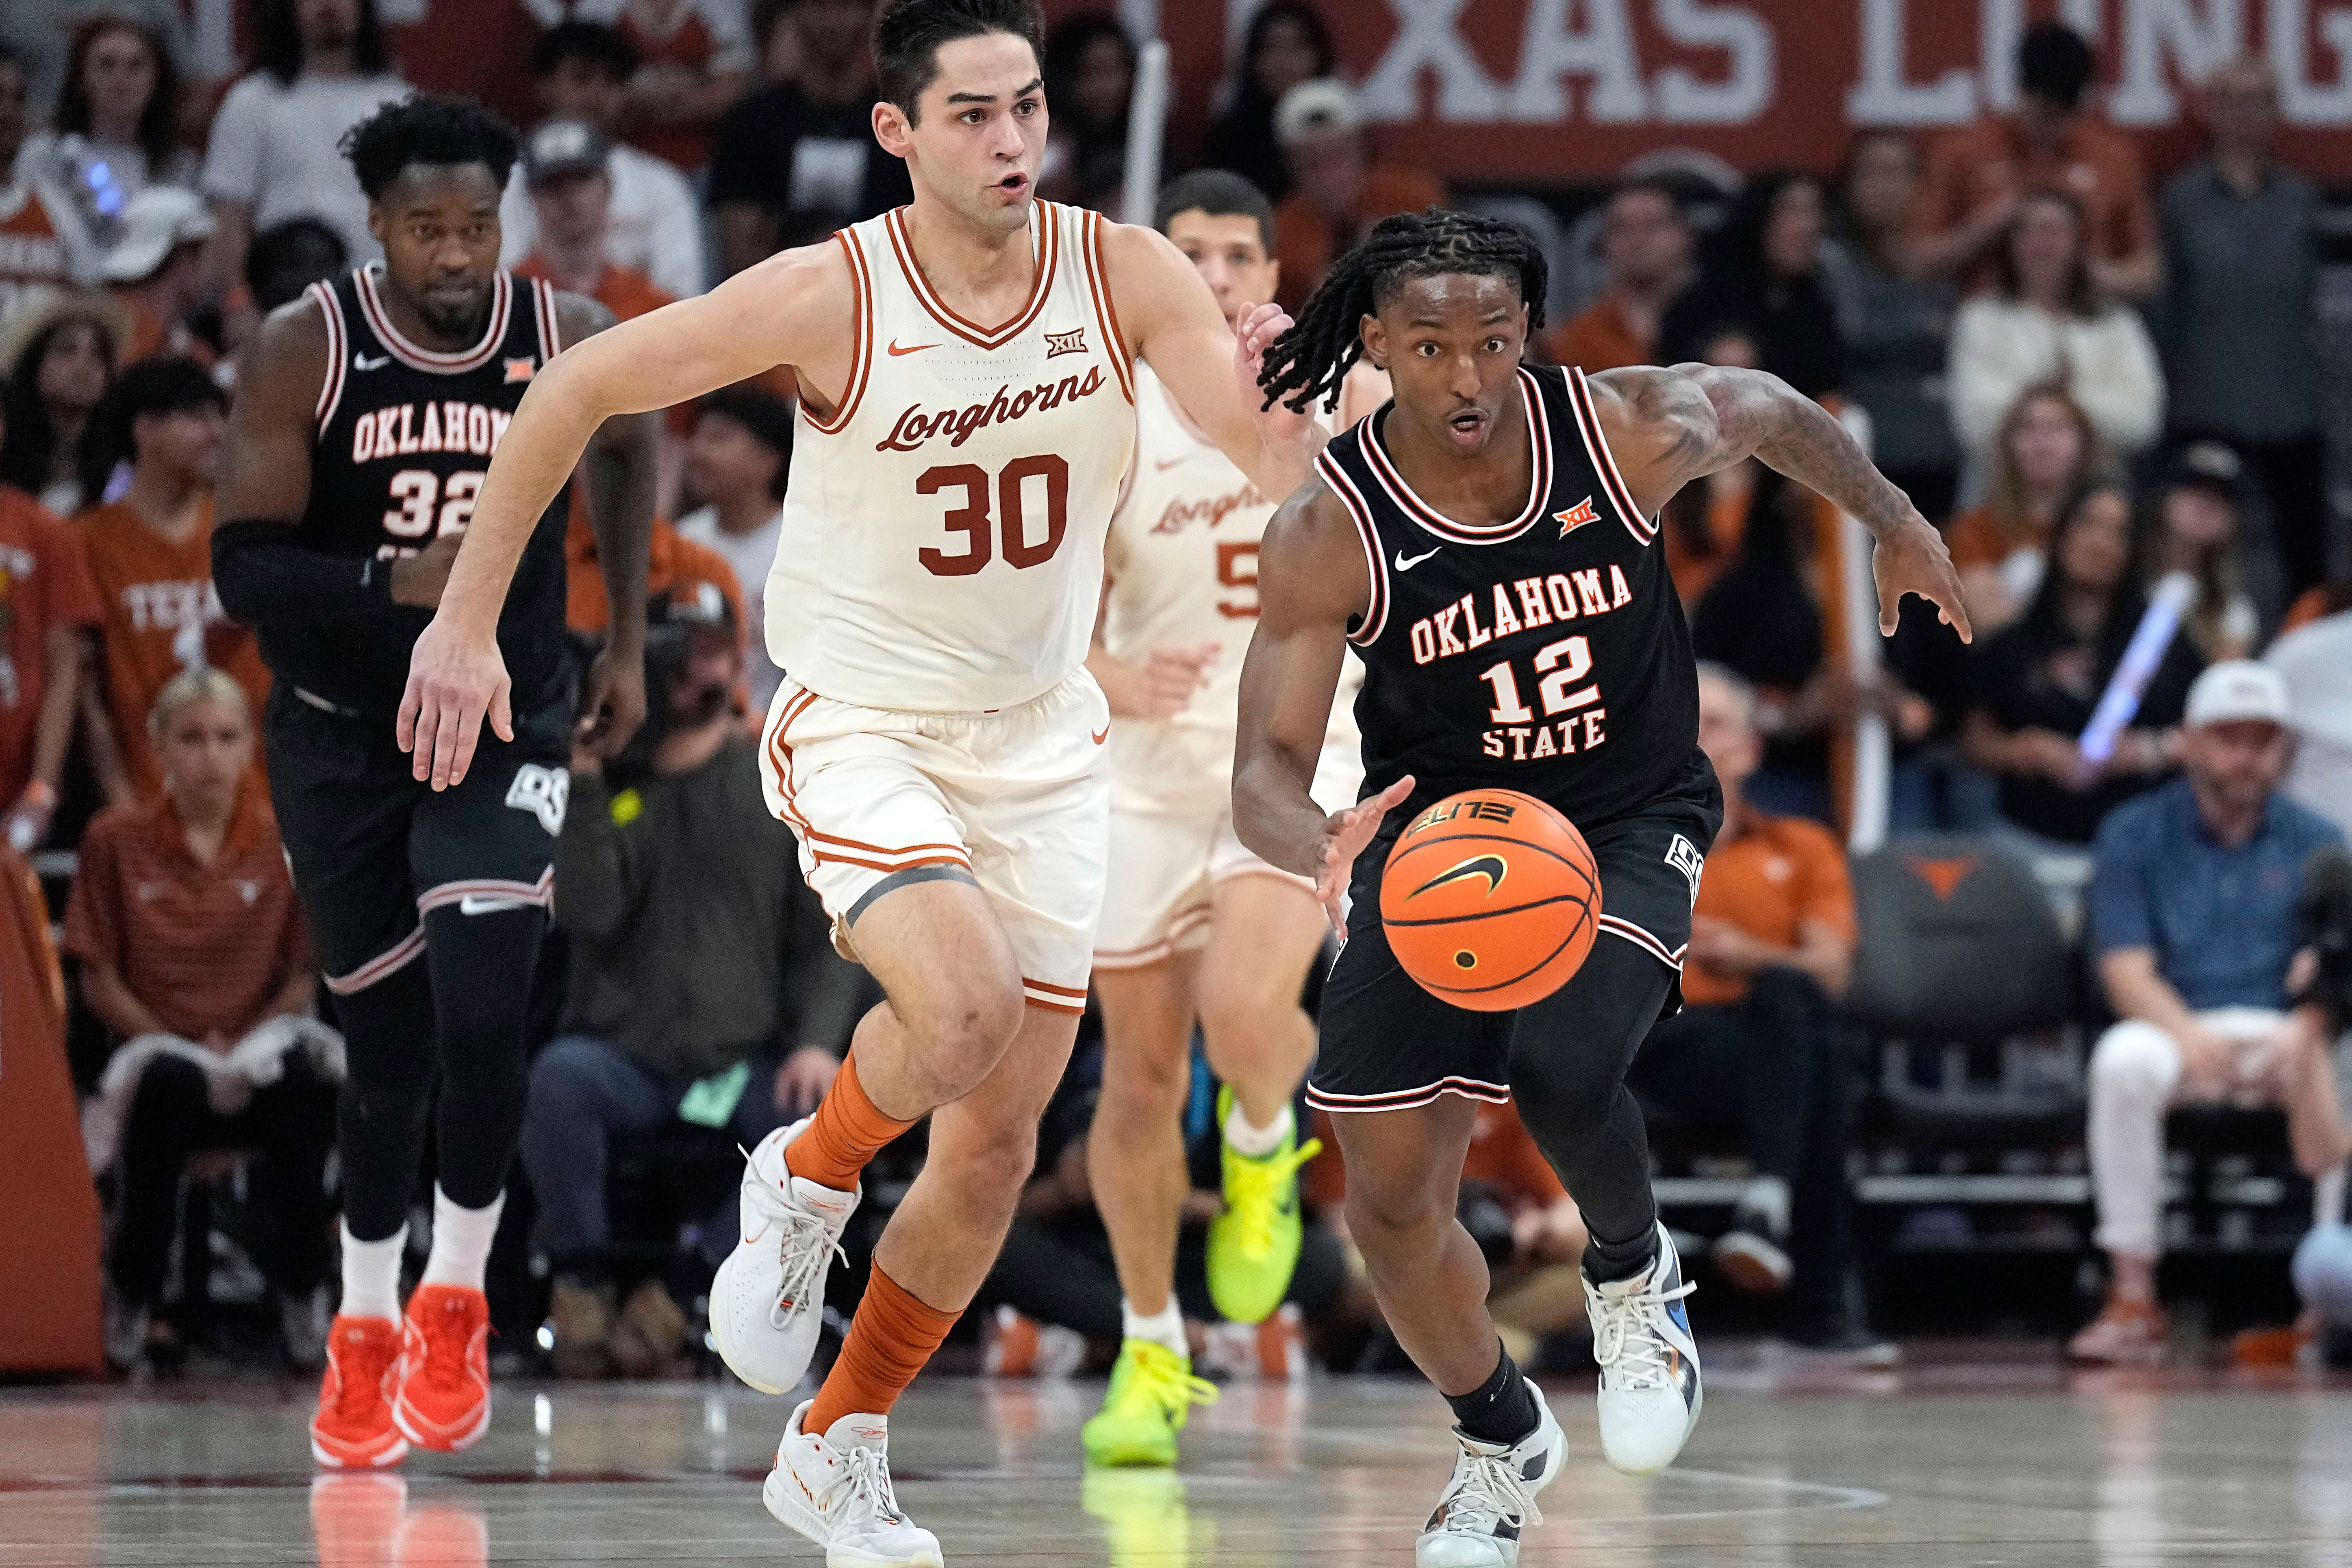 Javon Small tallied 15.1 ppg, 4.7 rpg and 4.1 apg for the Oklahoma State Cowboys last season.